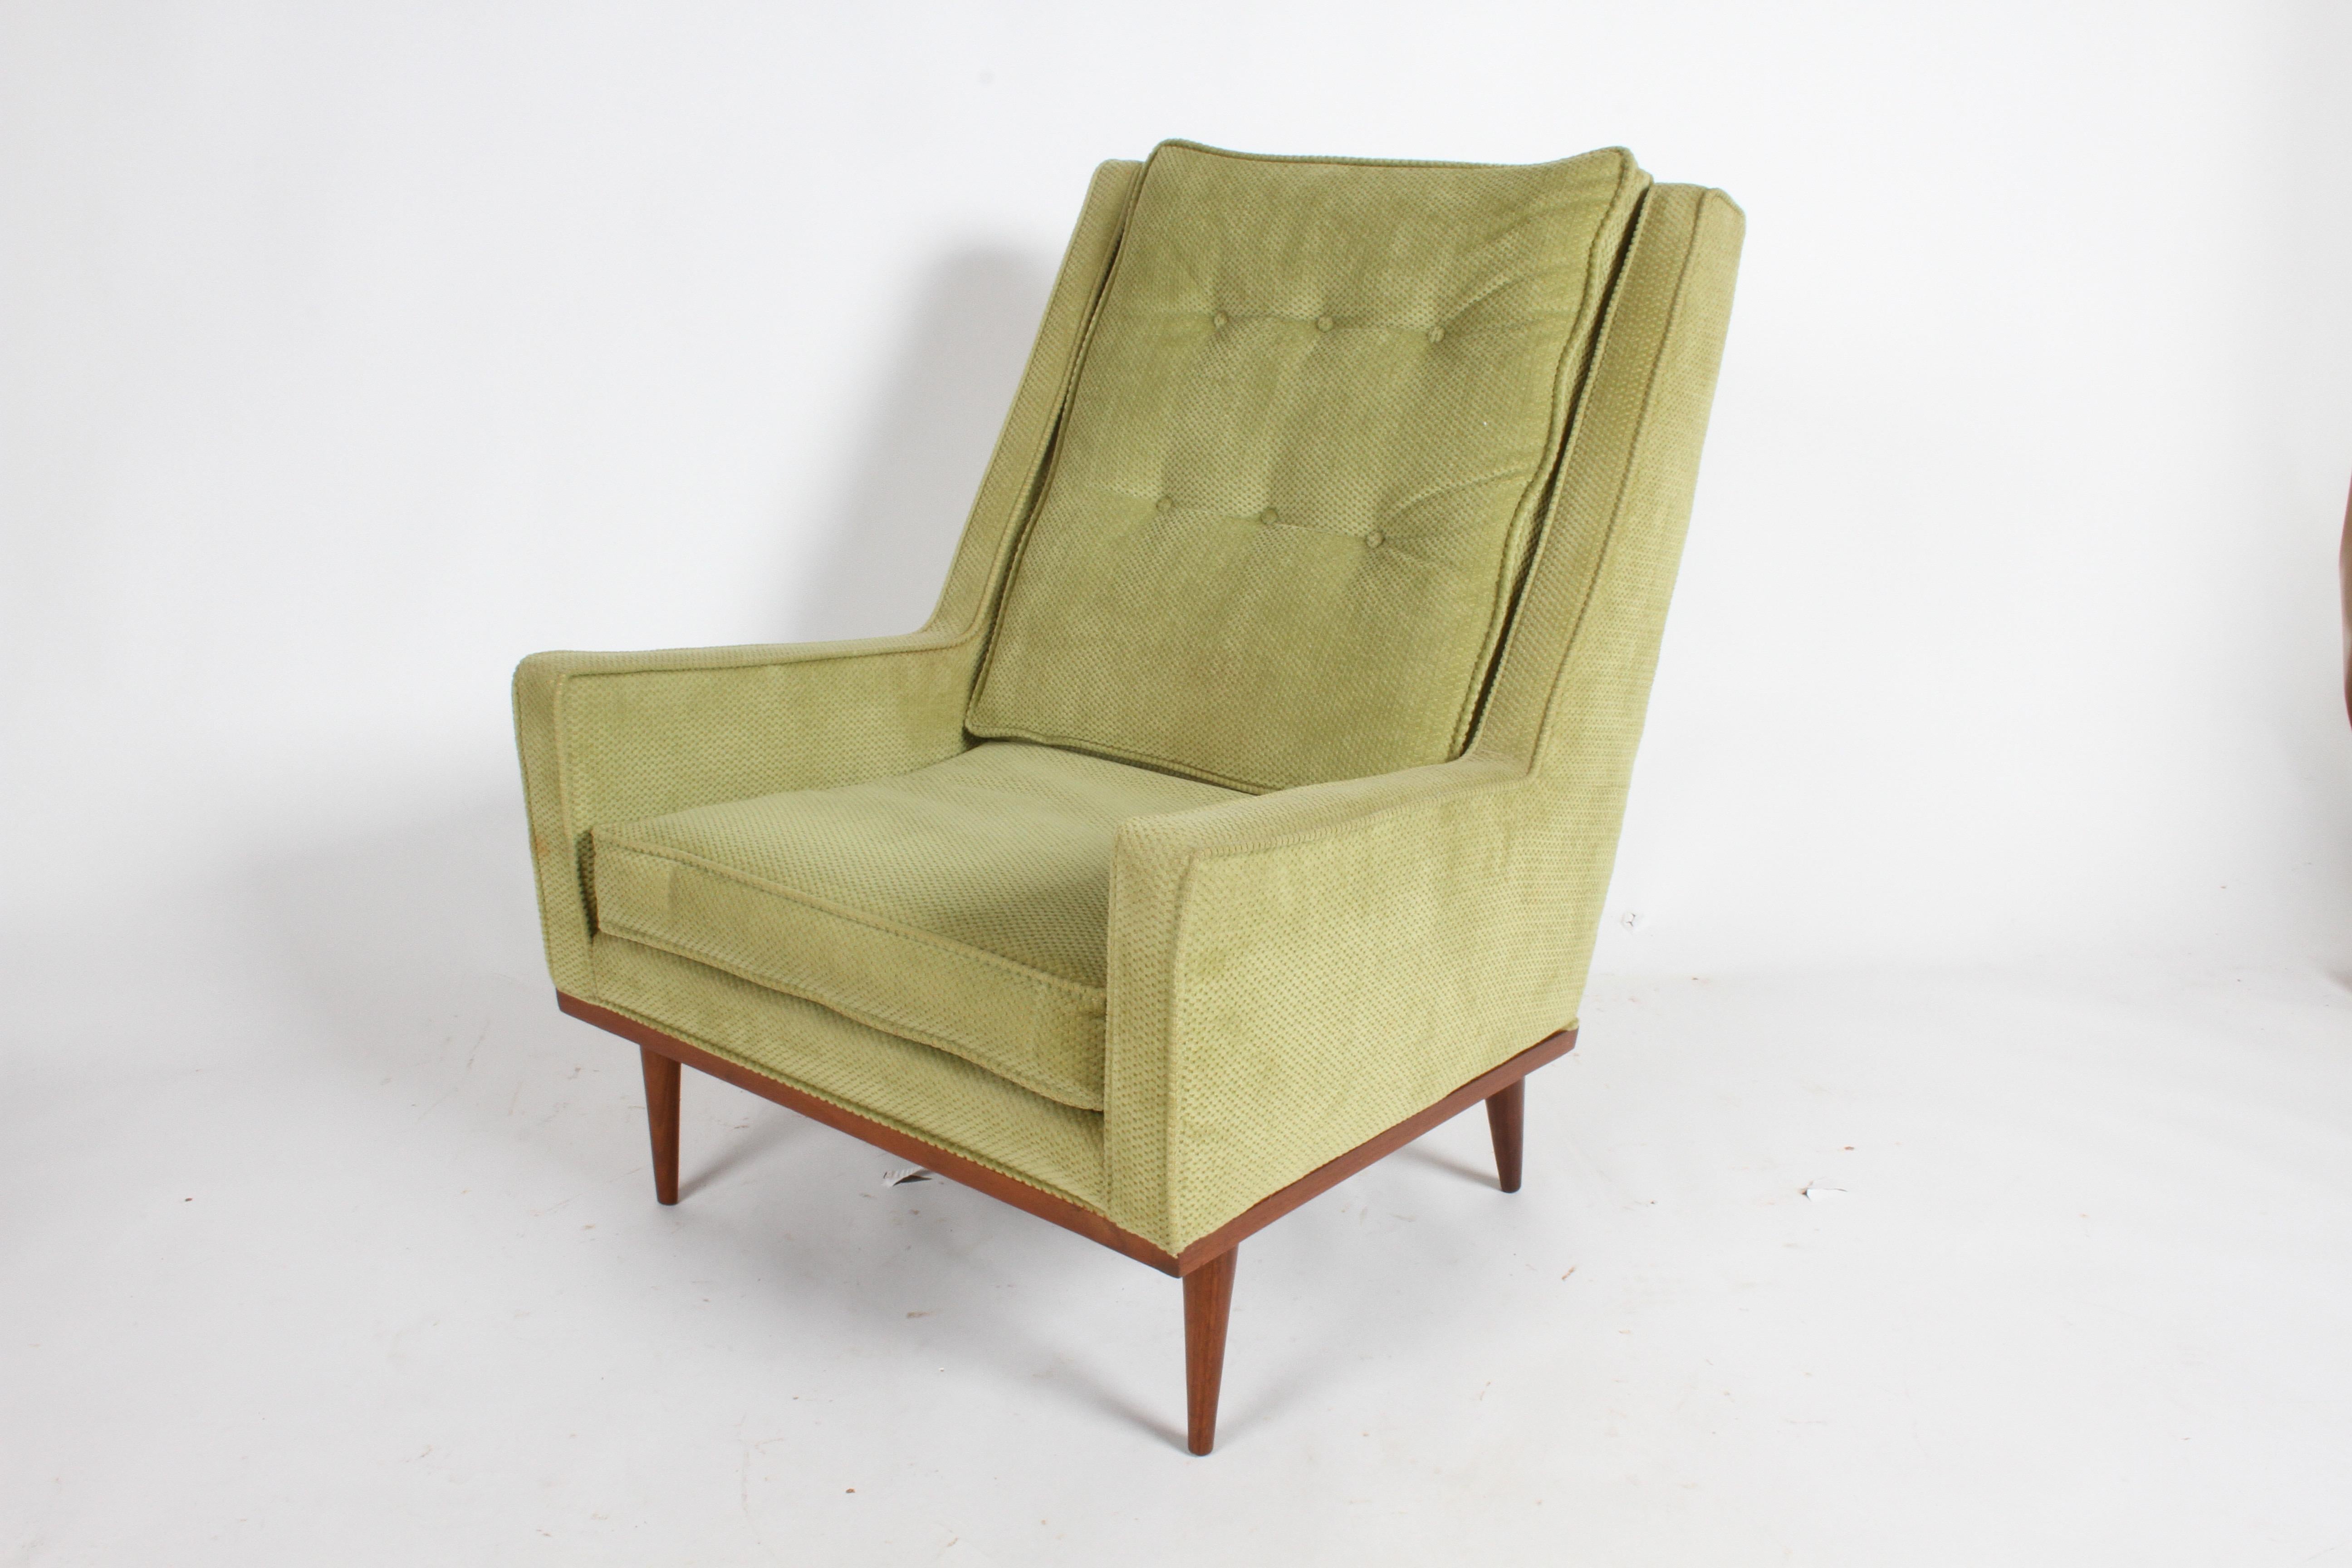 Milo Baughman for James Inc. king lounge chair, part of his articulate seating collection with Classic midcentury lines. This chair was reupholstered at some point in the last 20 years, walnut frame is original. Upholstery clean with minor stains.